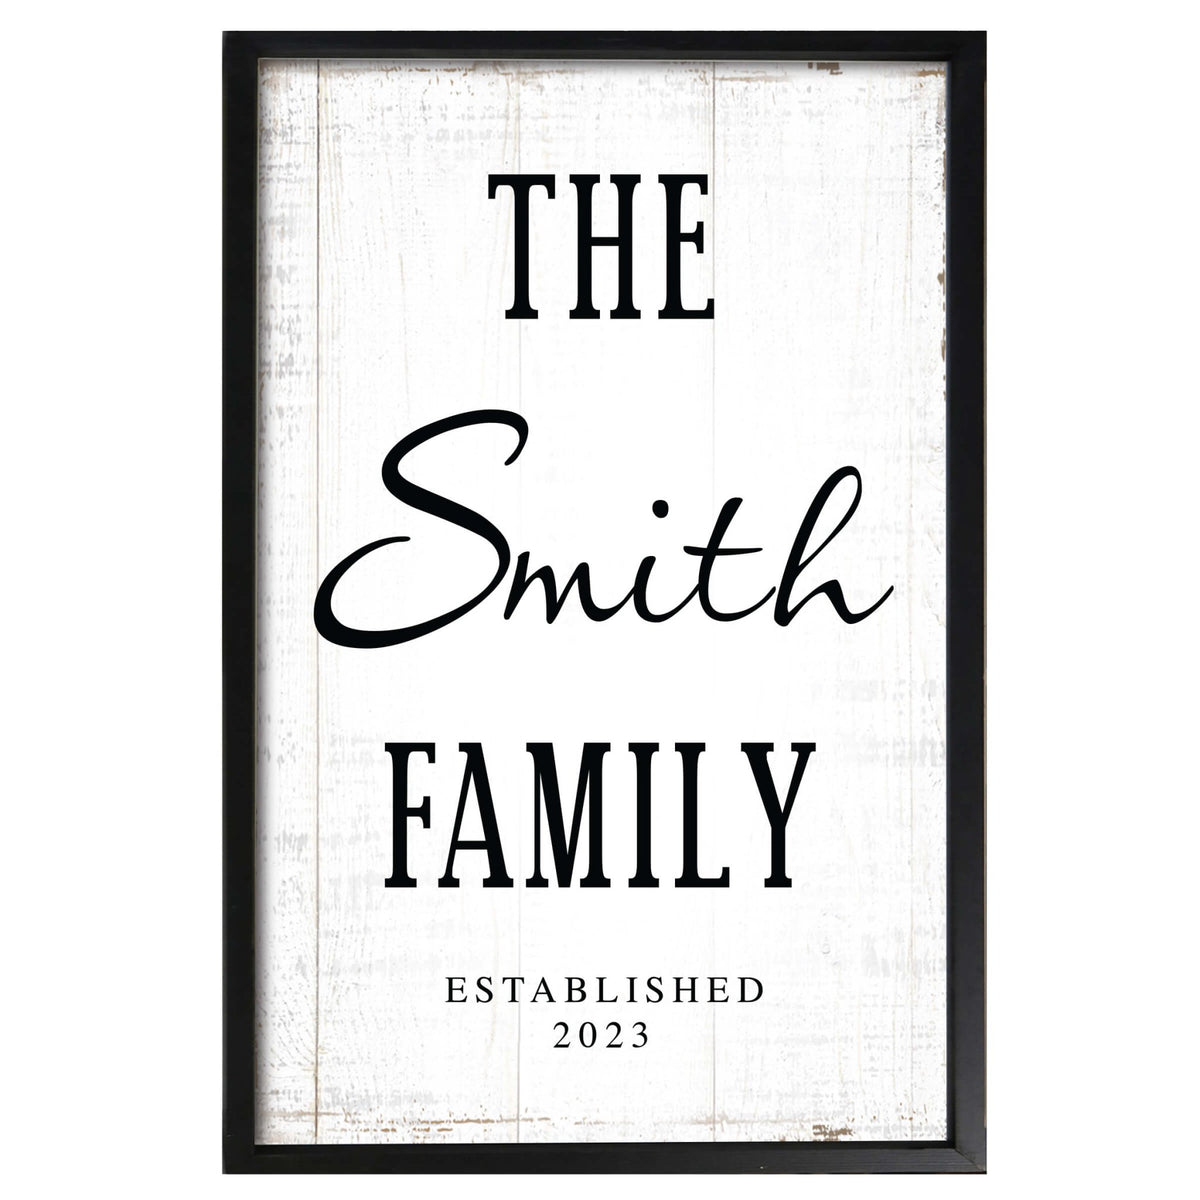 Personalized Framed Shadow Box for Family Home Décor - The Smith Family - LifeSong Milestones